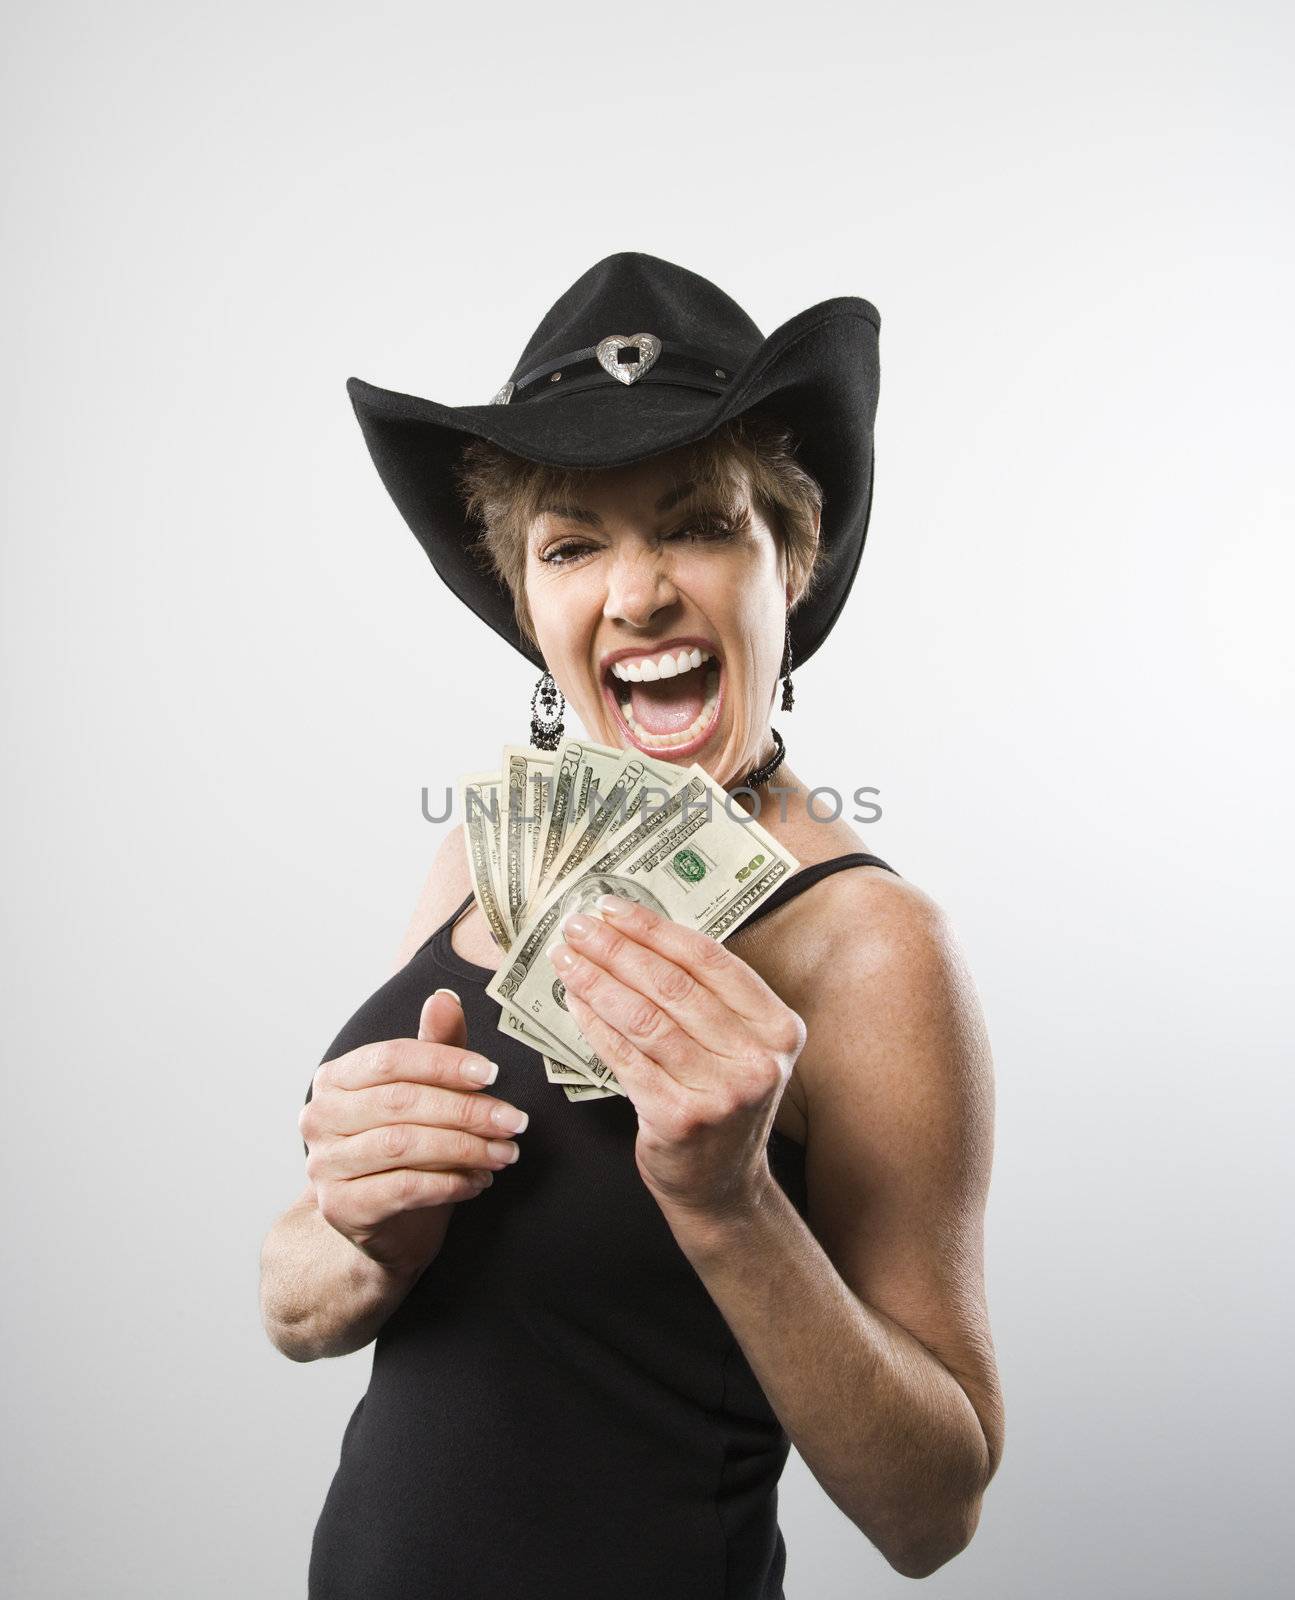 Woman making facial expression and holding twenty dollar bills in hand.